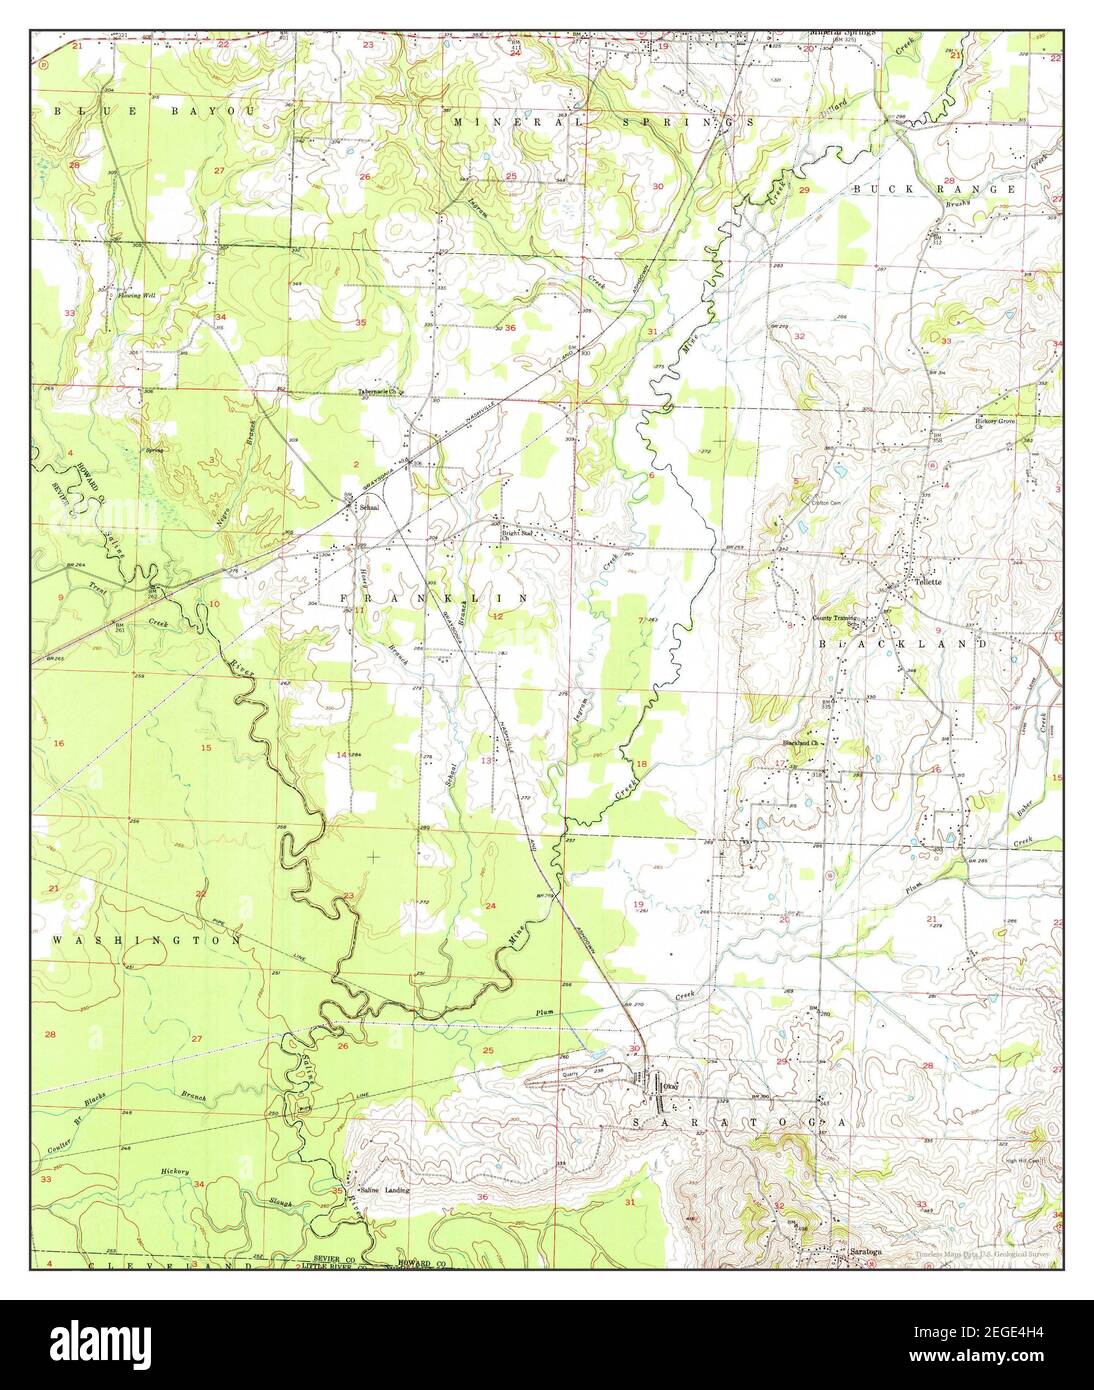 Mineral Springs South, Arkansas, map 1951, 1:24000, United States of America by Timeless Maps, data U.S. Geological Survey Foto Stock